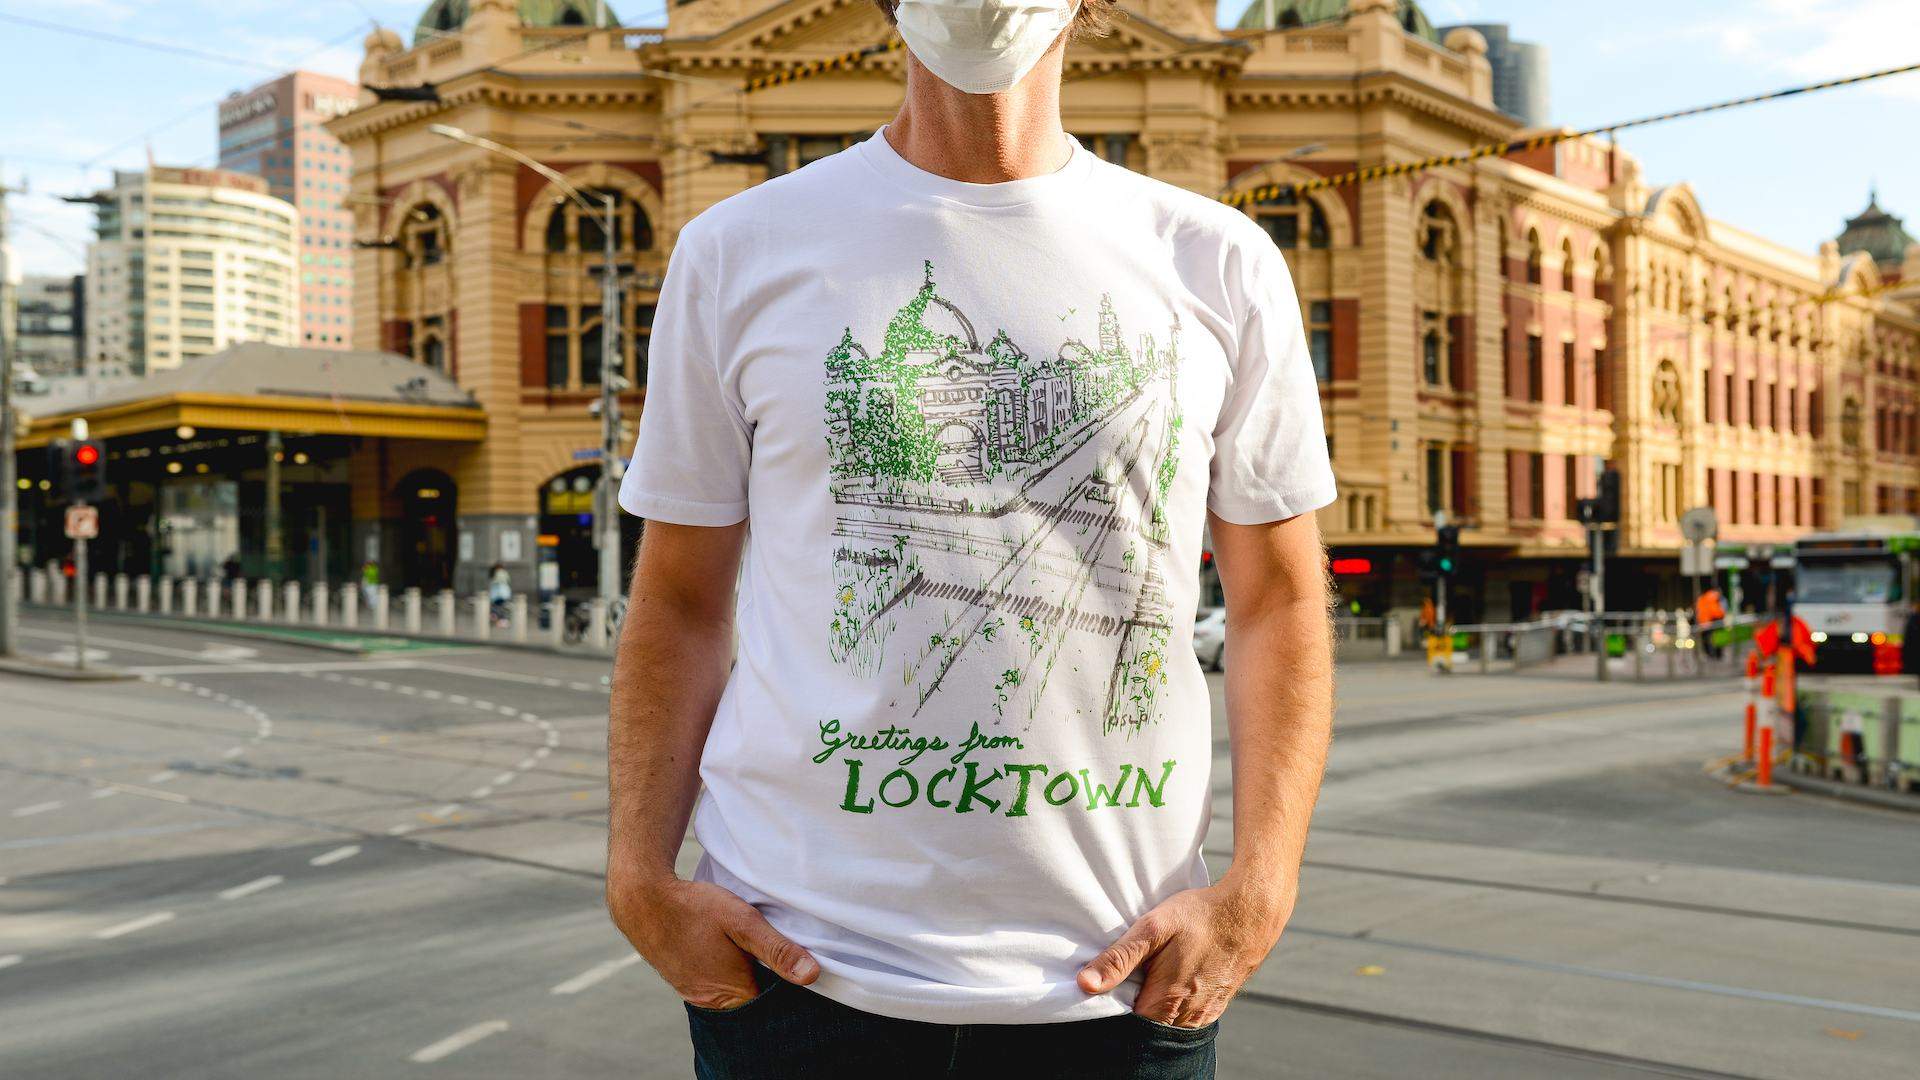 Melbourne's New Limited-Edition Lockdown Commemoration T-Shirt Features Artwork by Oslo Davis